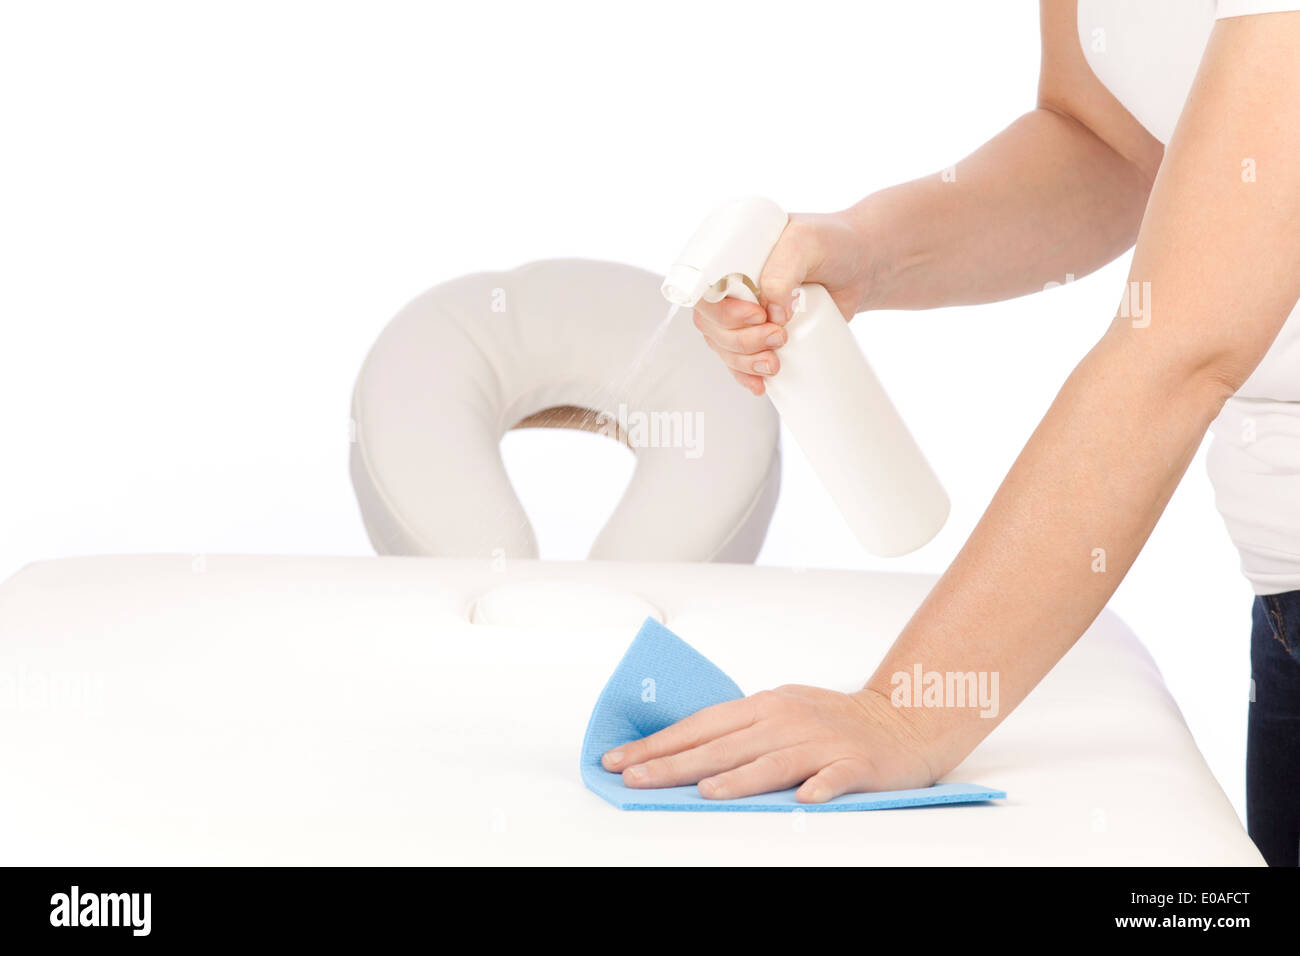 Disinfecting a massage table Stock Photo